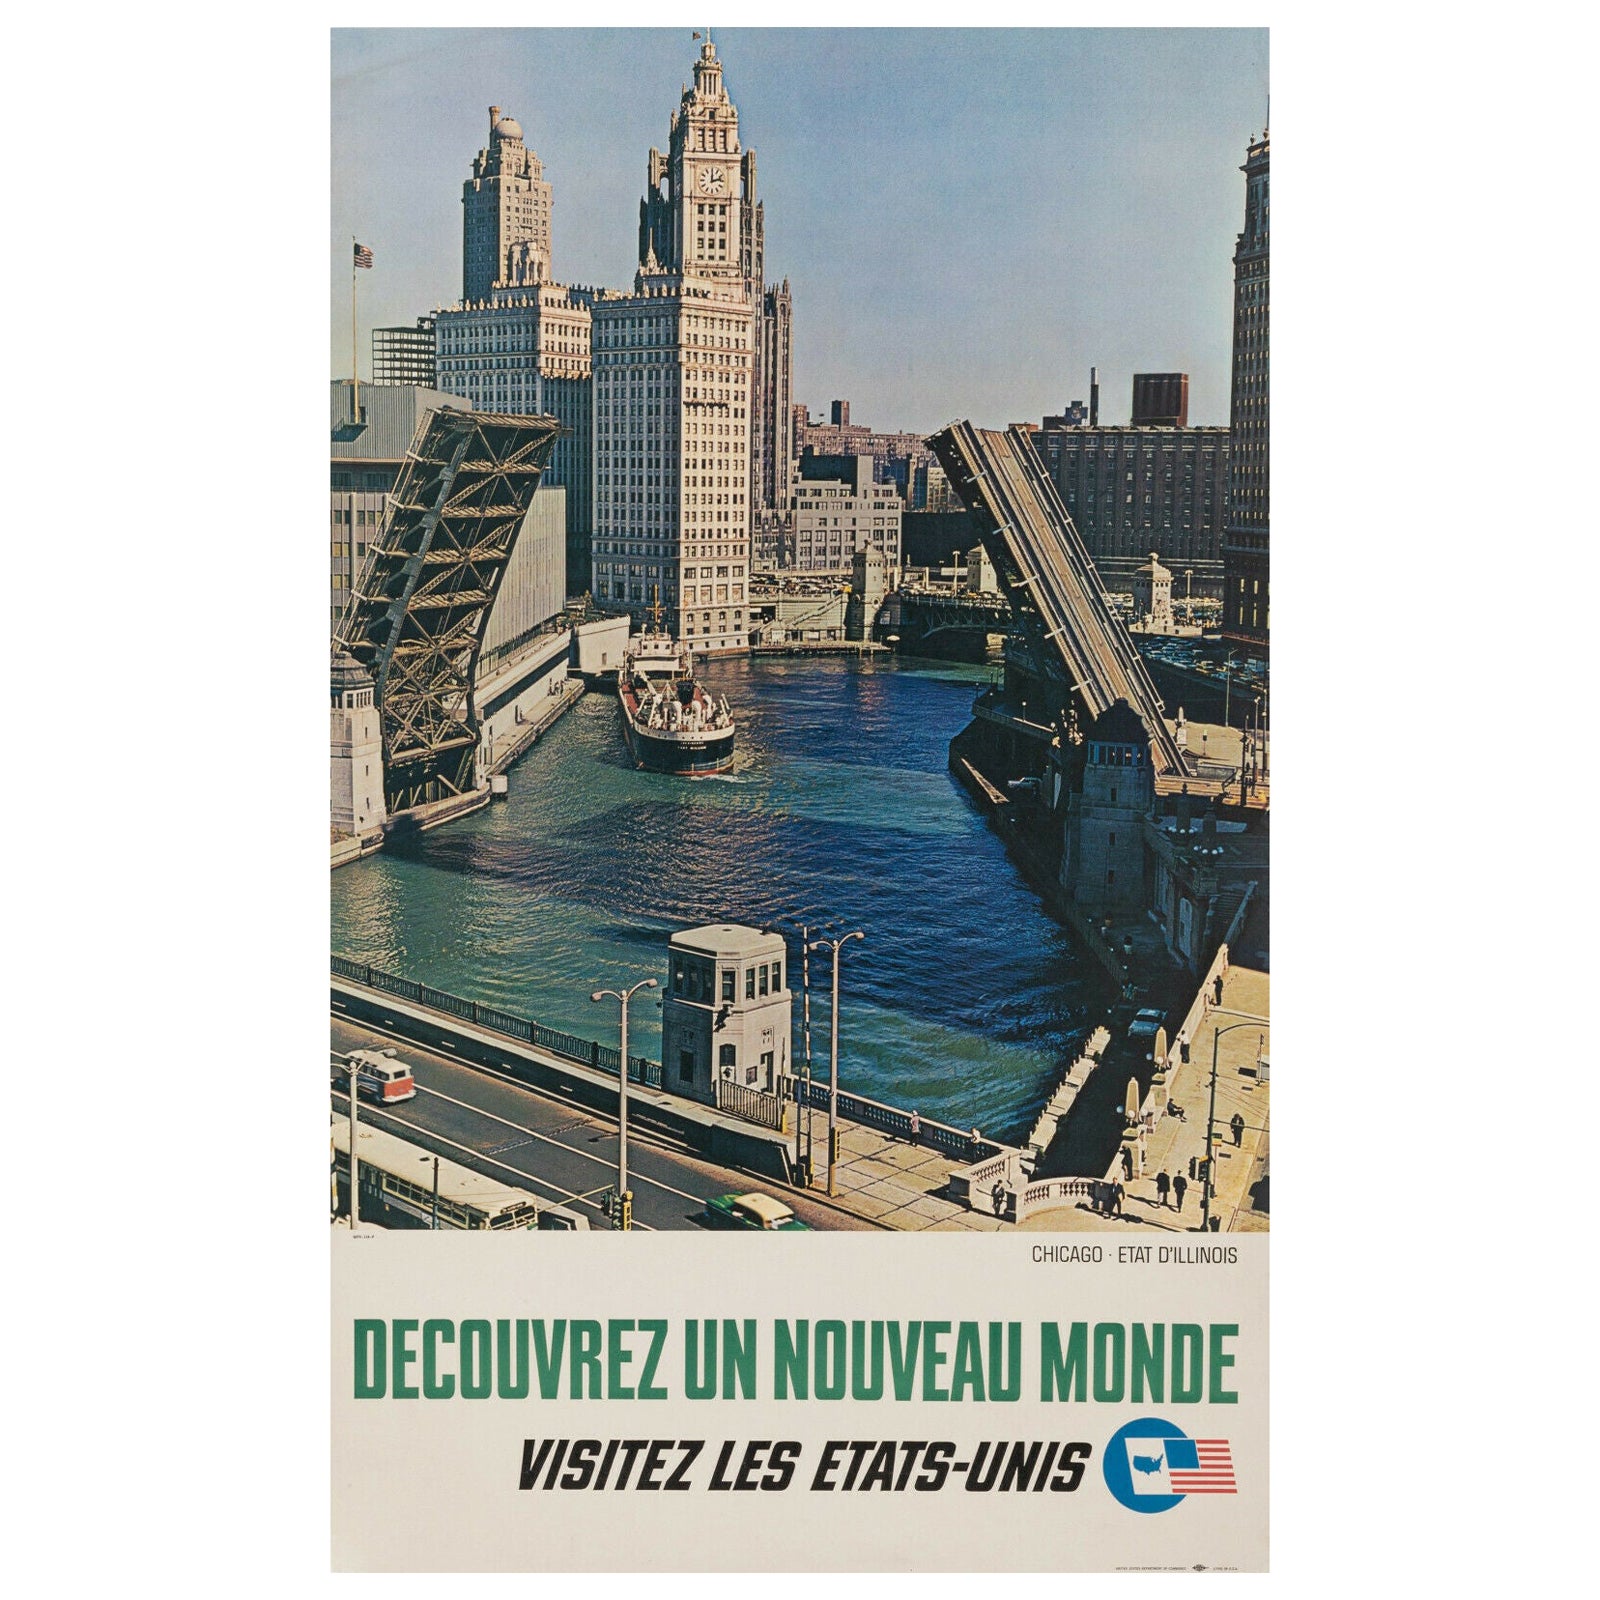 Original Vintage Poster-Discover a New World-Chicago-Illinois-Usa, 1963 For Sale